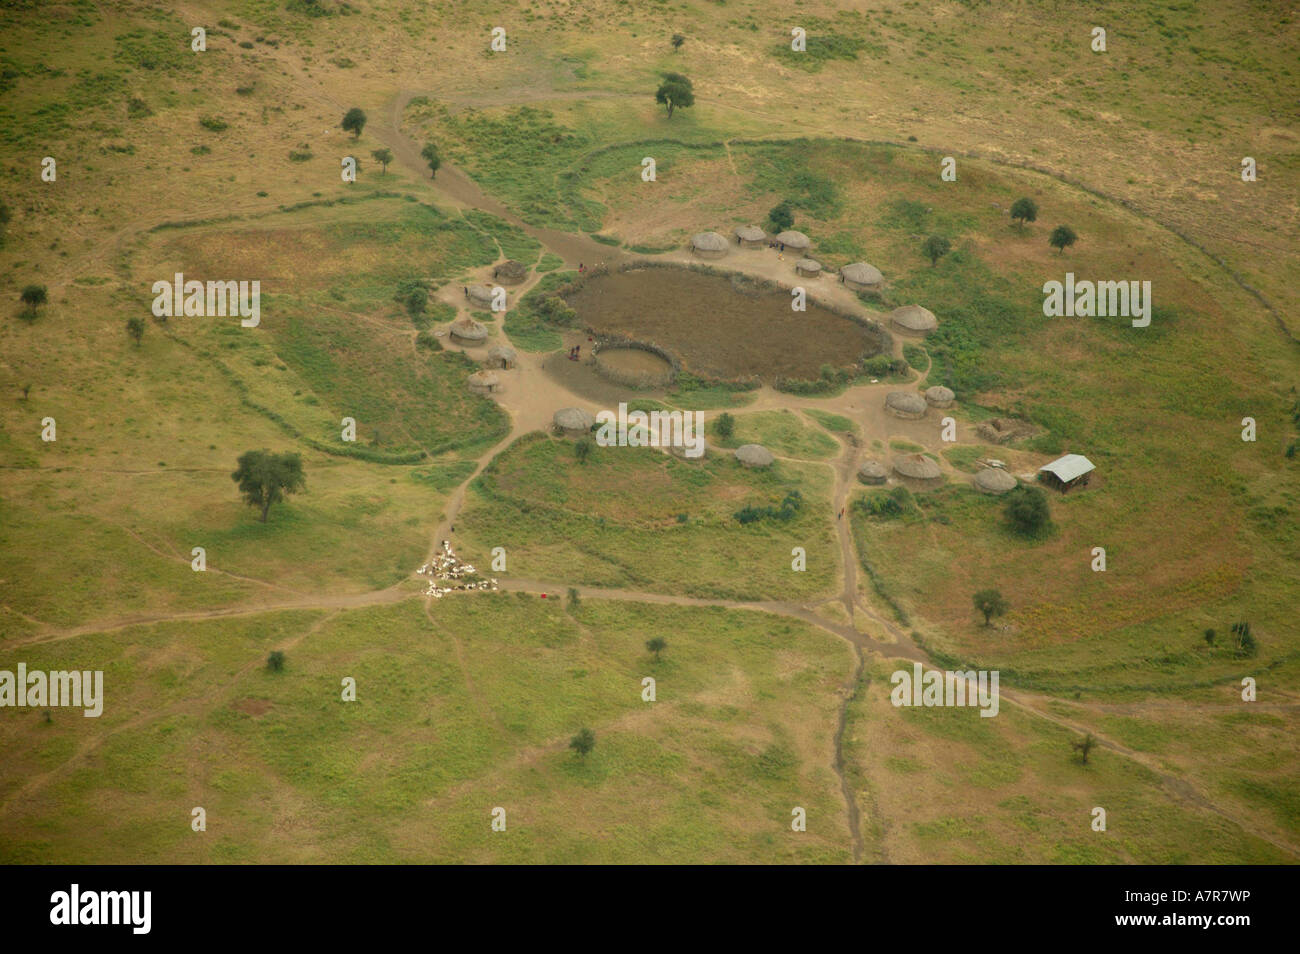 An aerial view over a rural Masaai homestead built around a cattle and goat kraal and with a network of paths leading from them Stock Photo